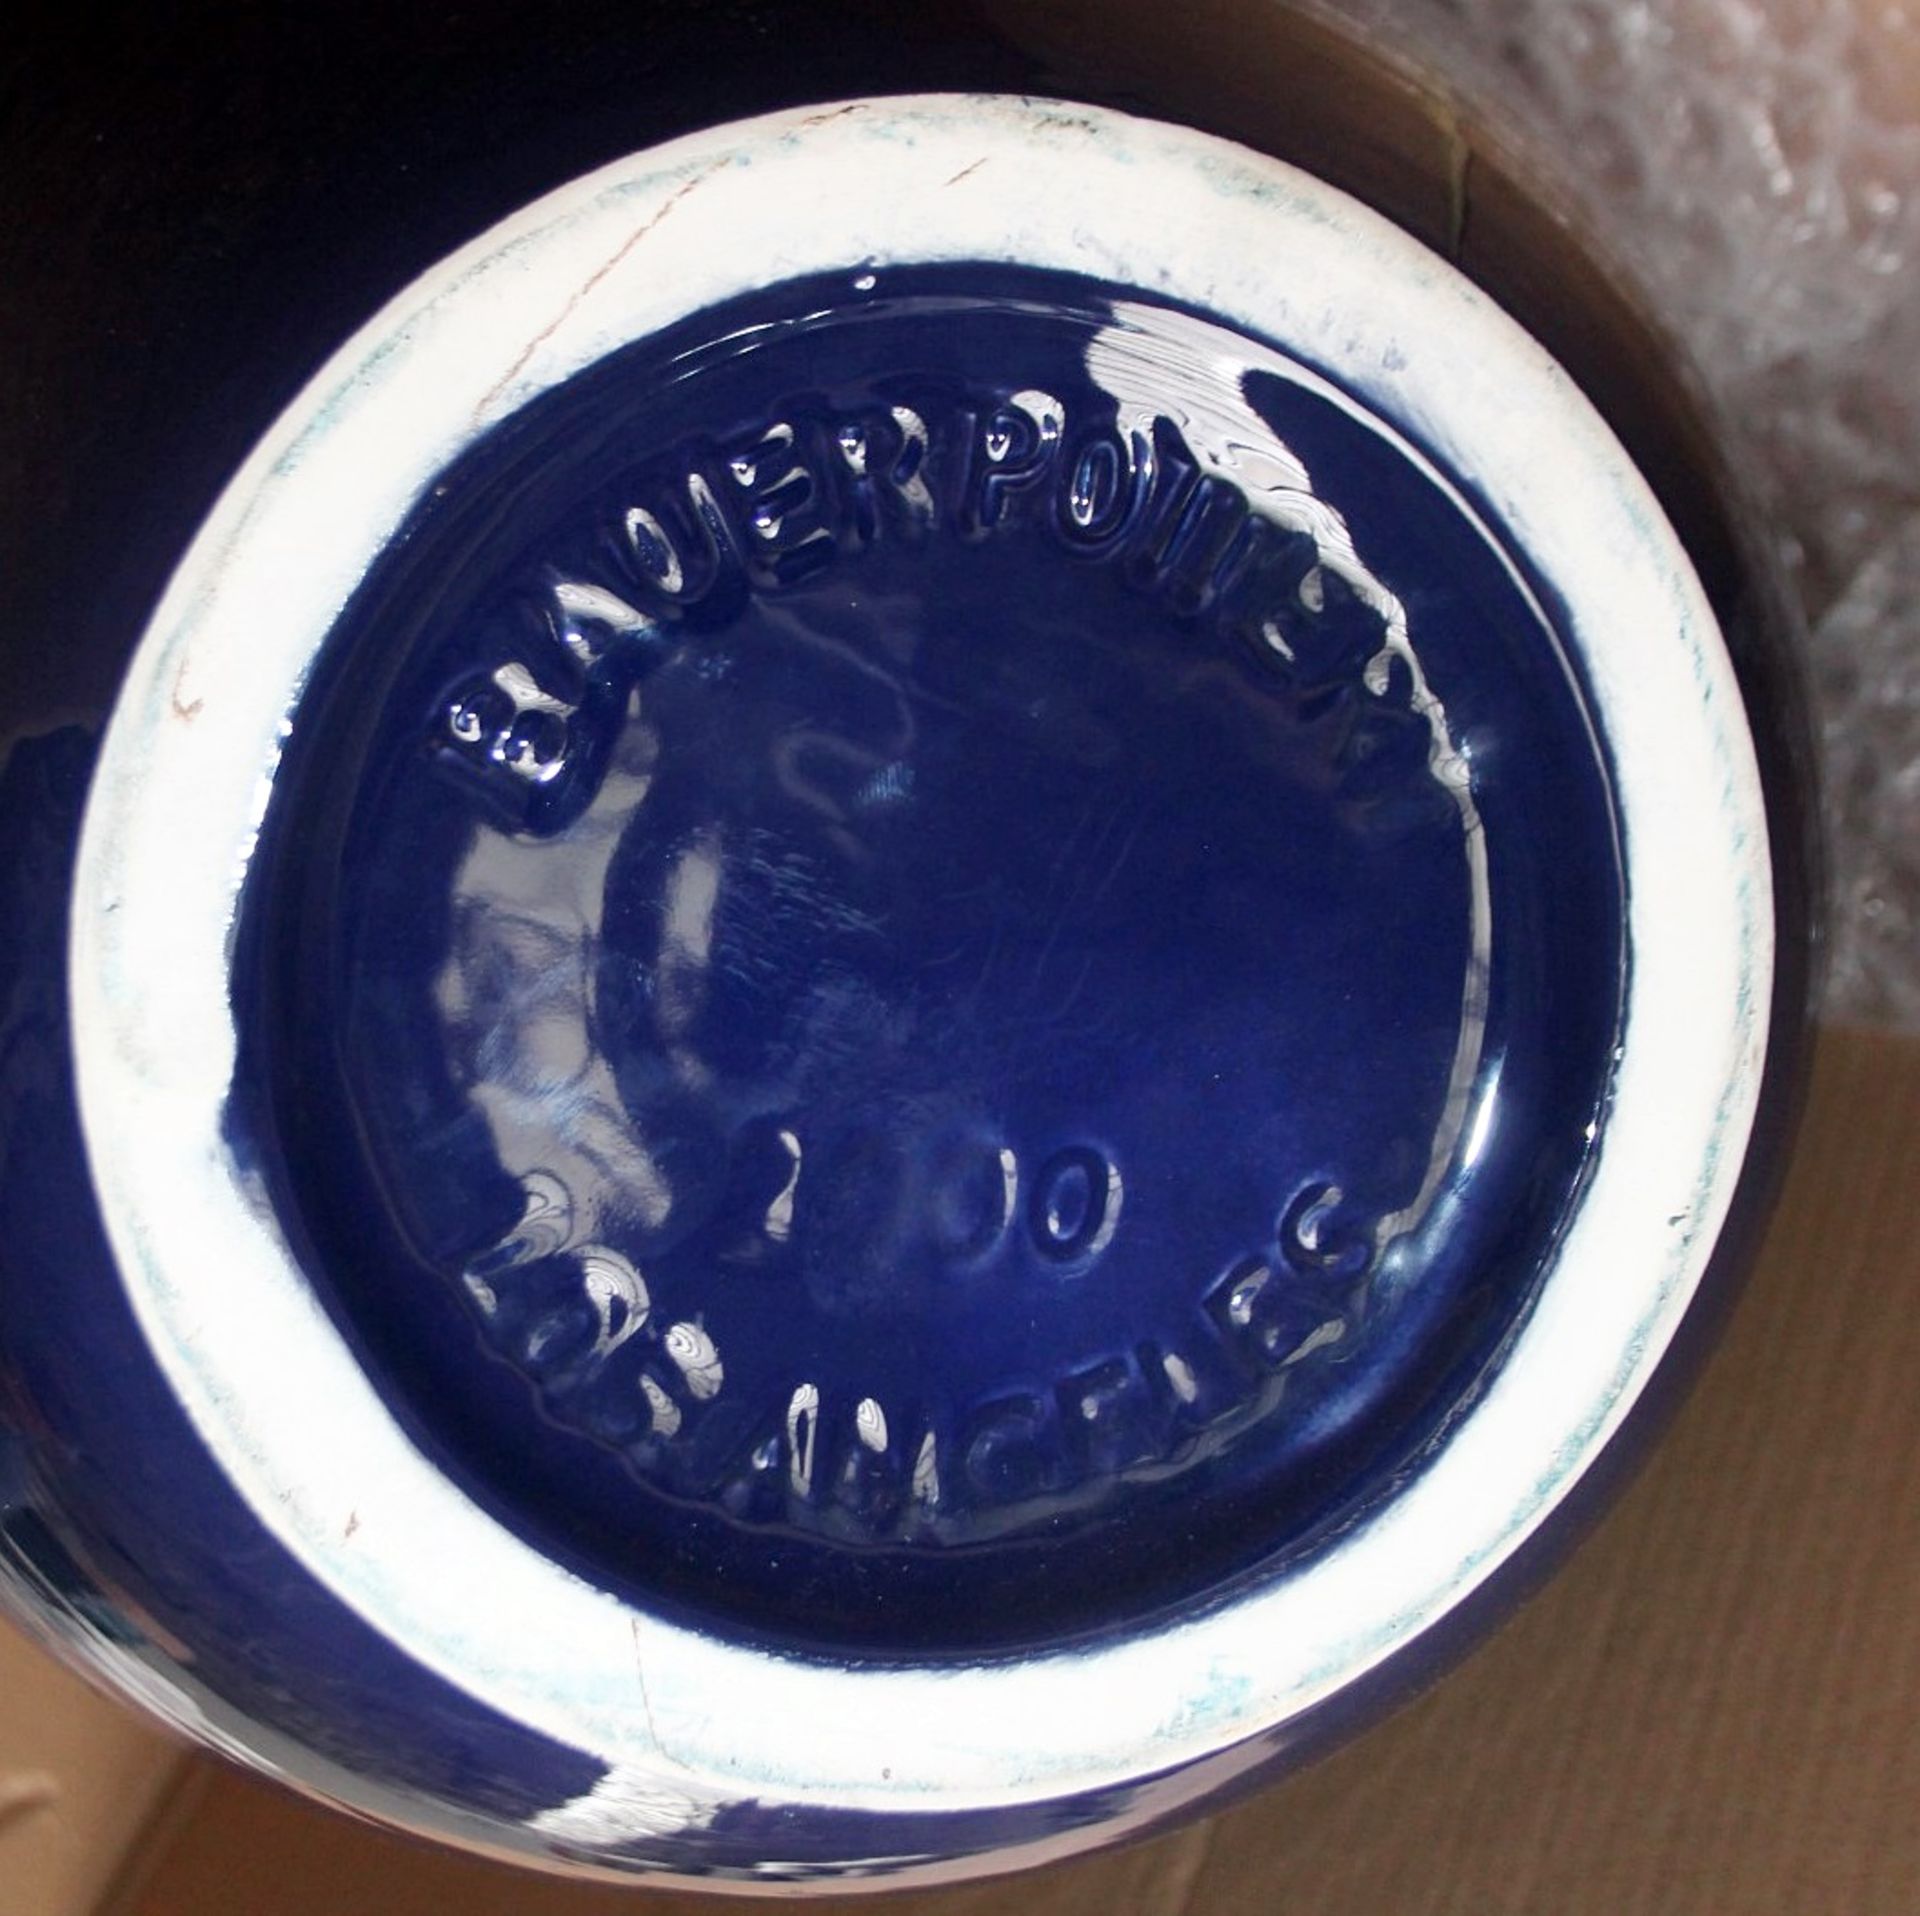 1 x BAUER POTTERY LOS ANGELES Large 22 Inch Oil Jar In Blue (Circa 2000) - Original Price £700.00 - Image 3 of 4